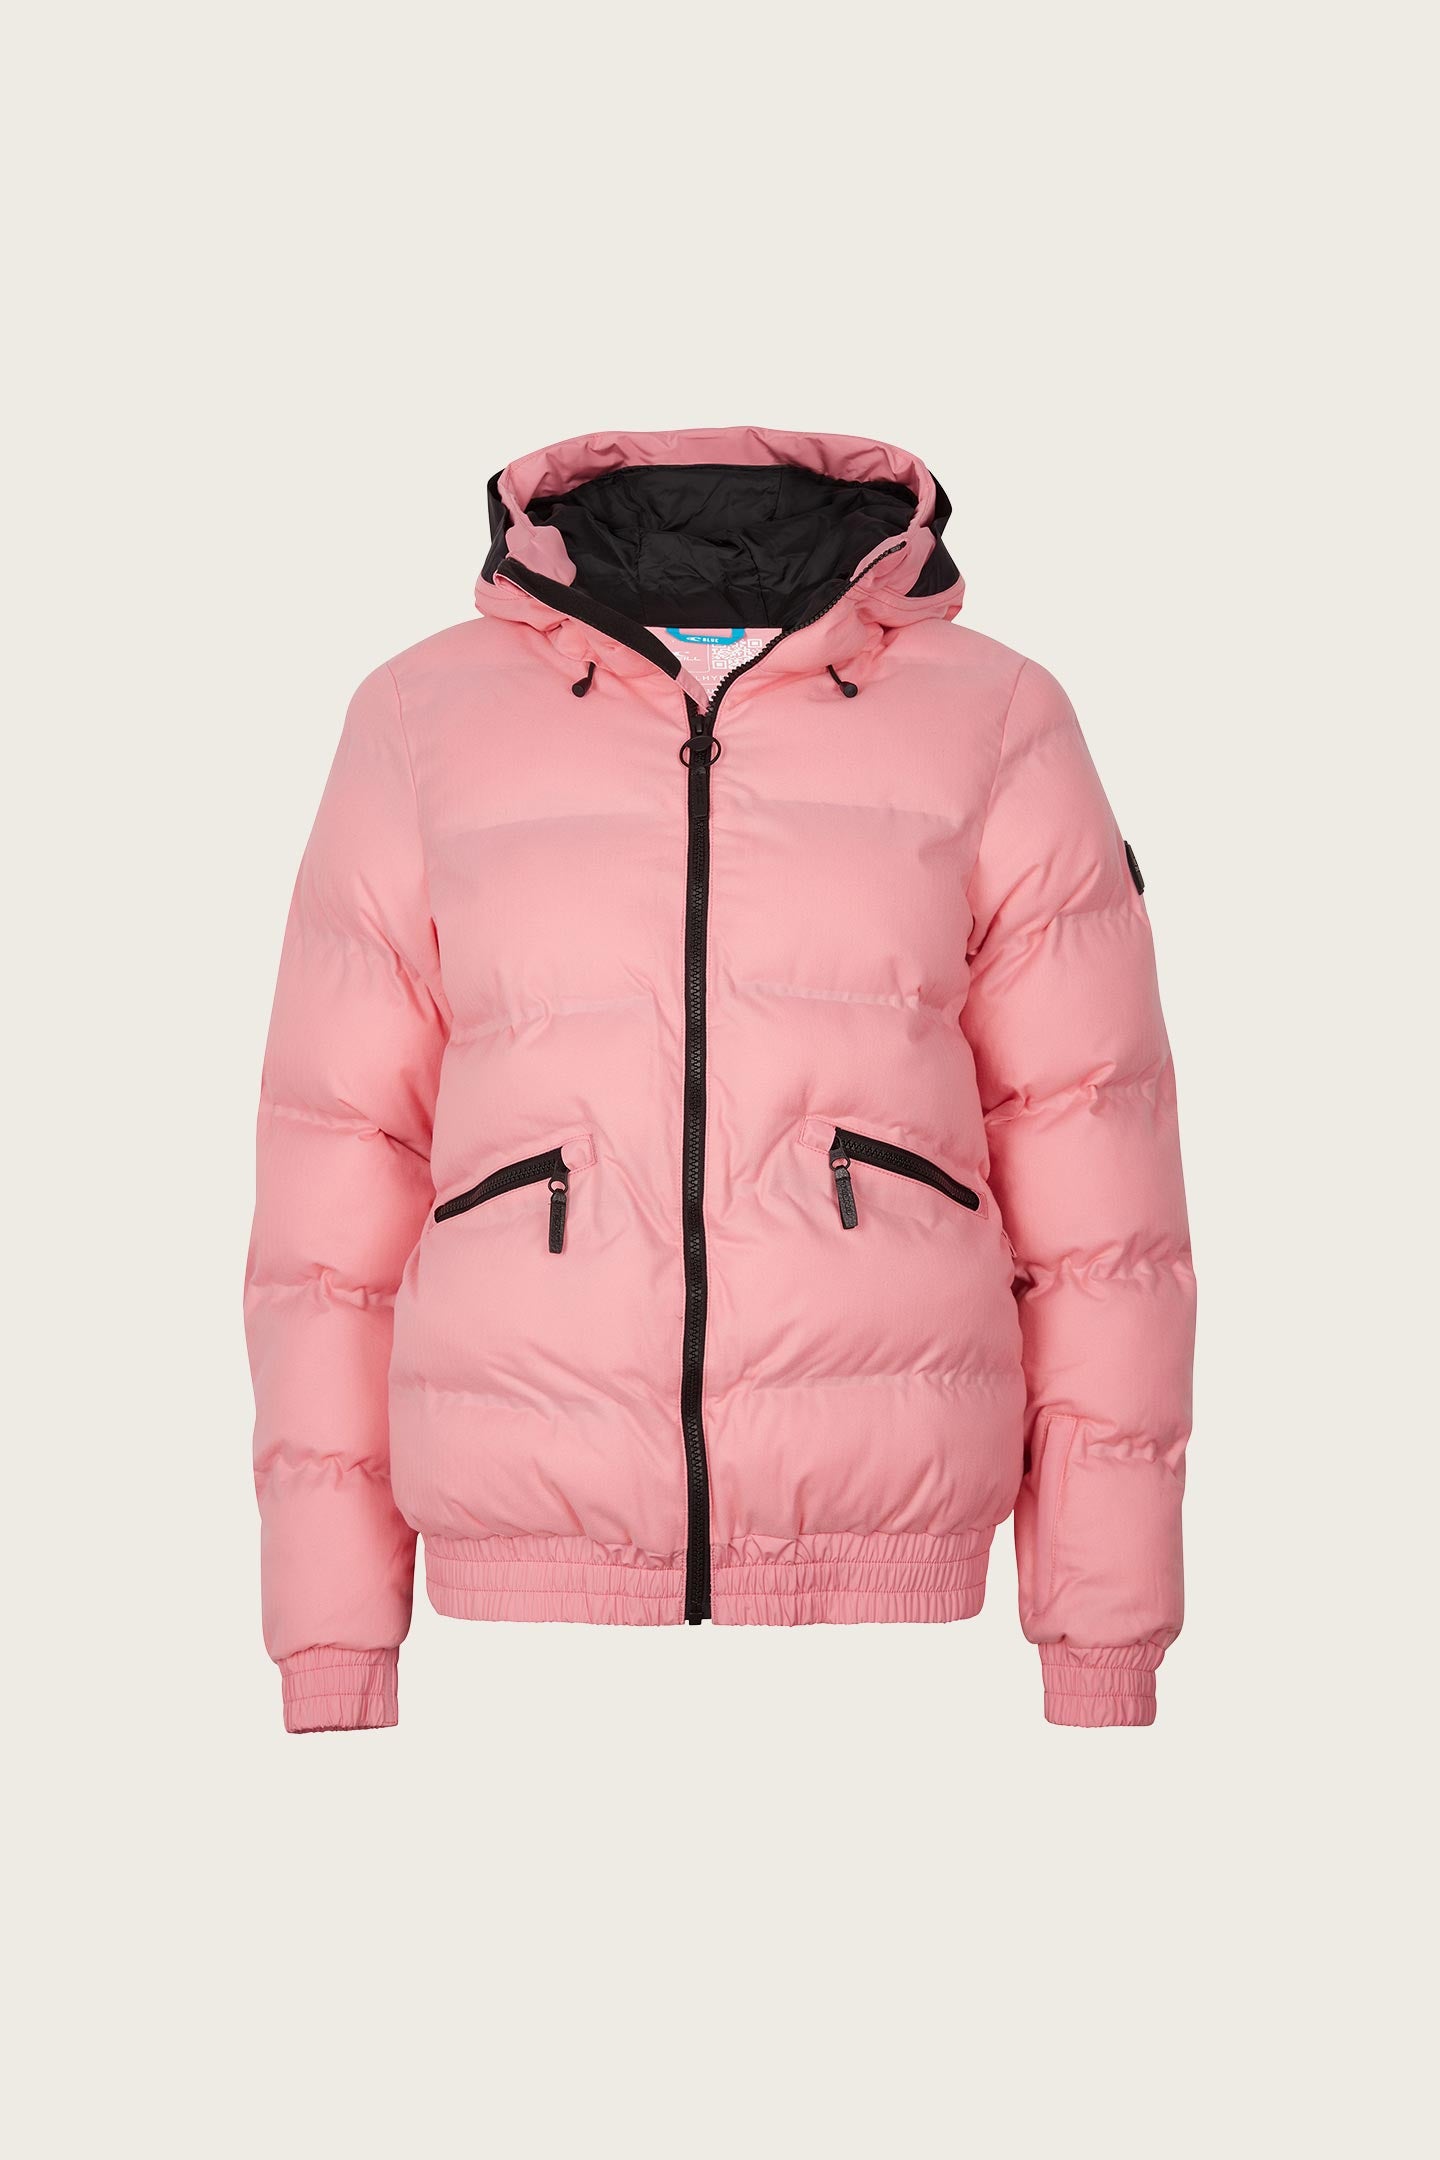 Outerknown Lennon Jacket in Mineral Pink - Eleven the Shop